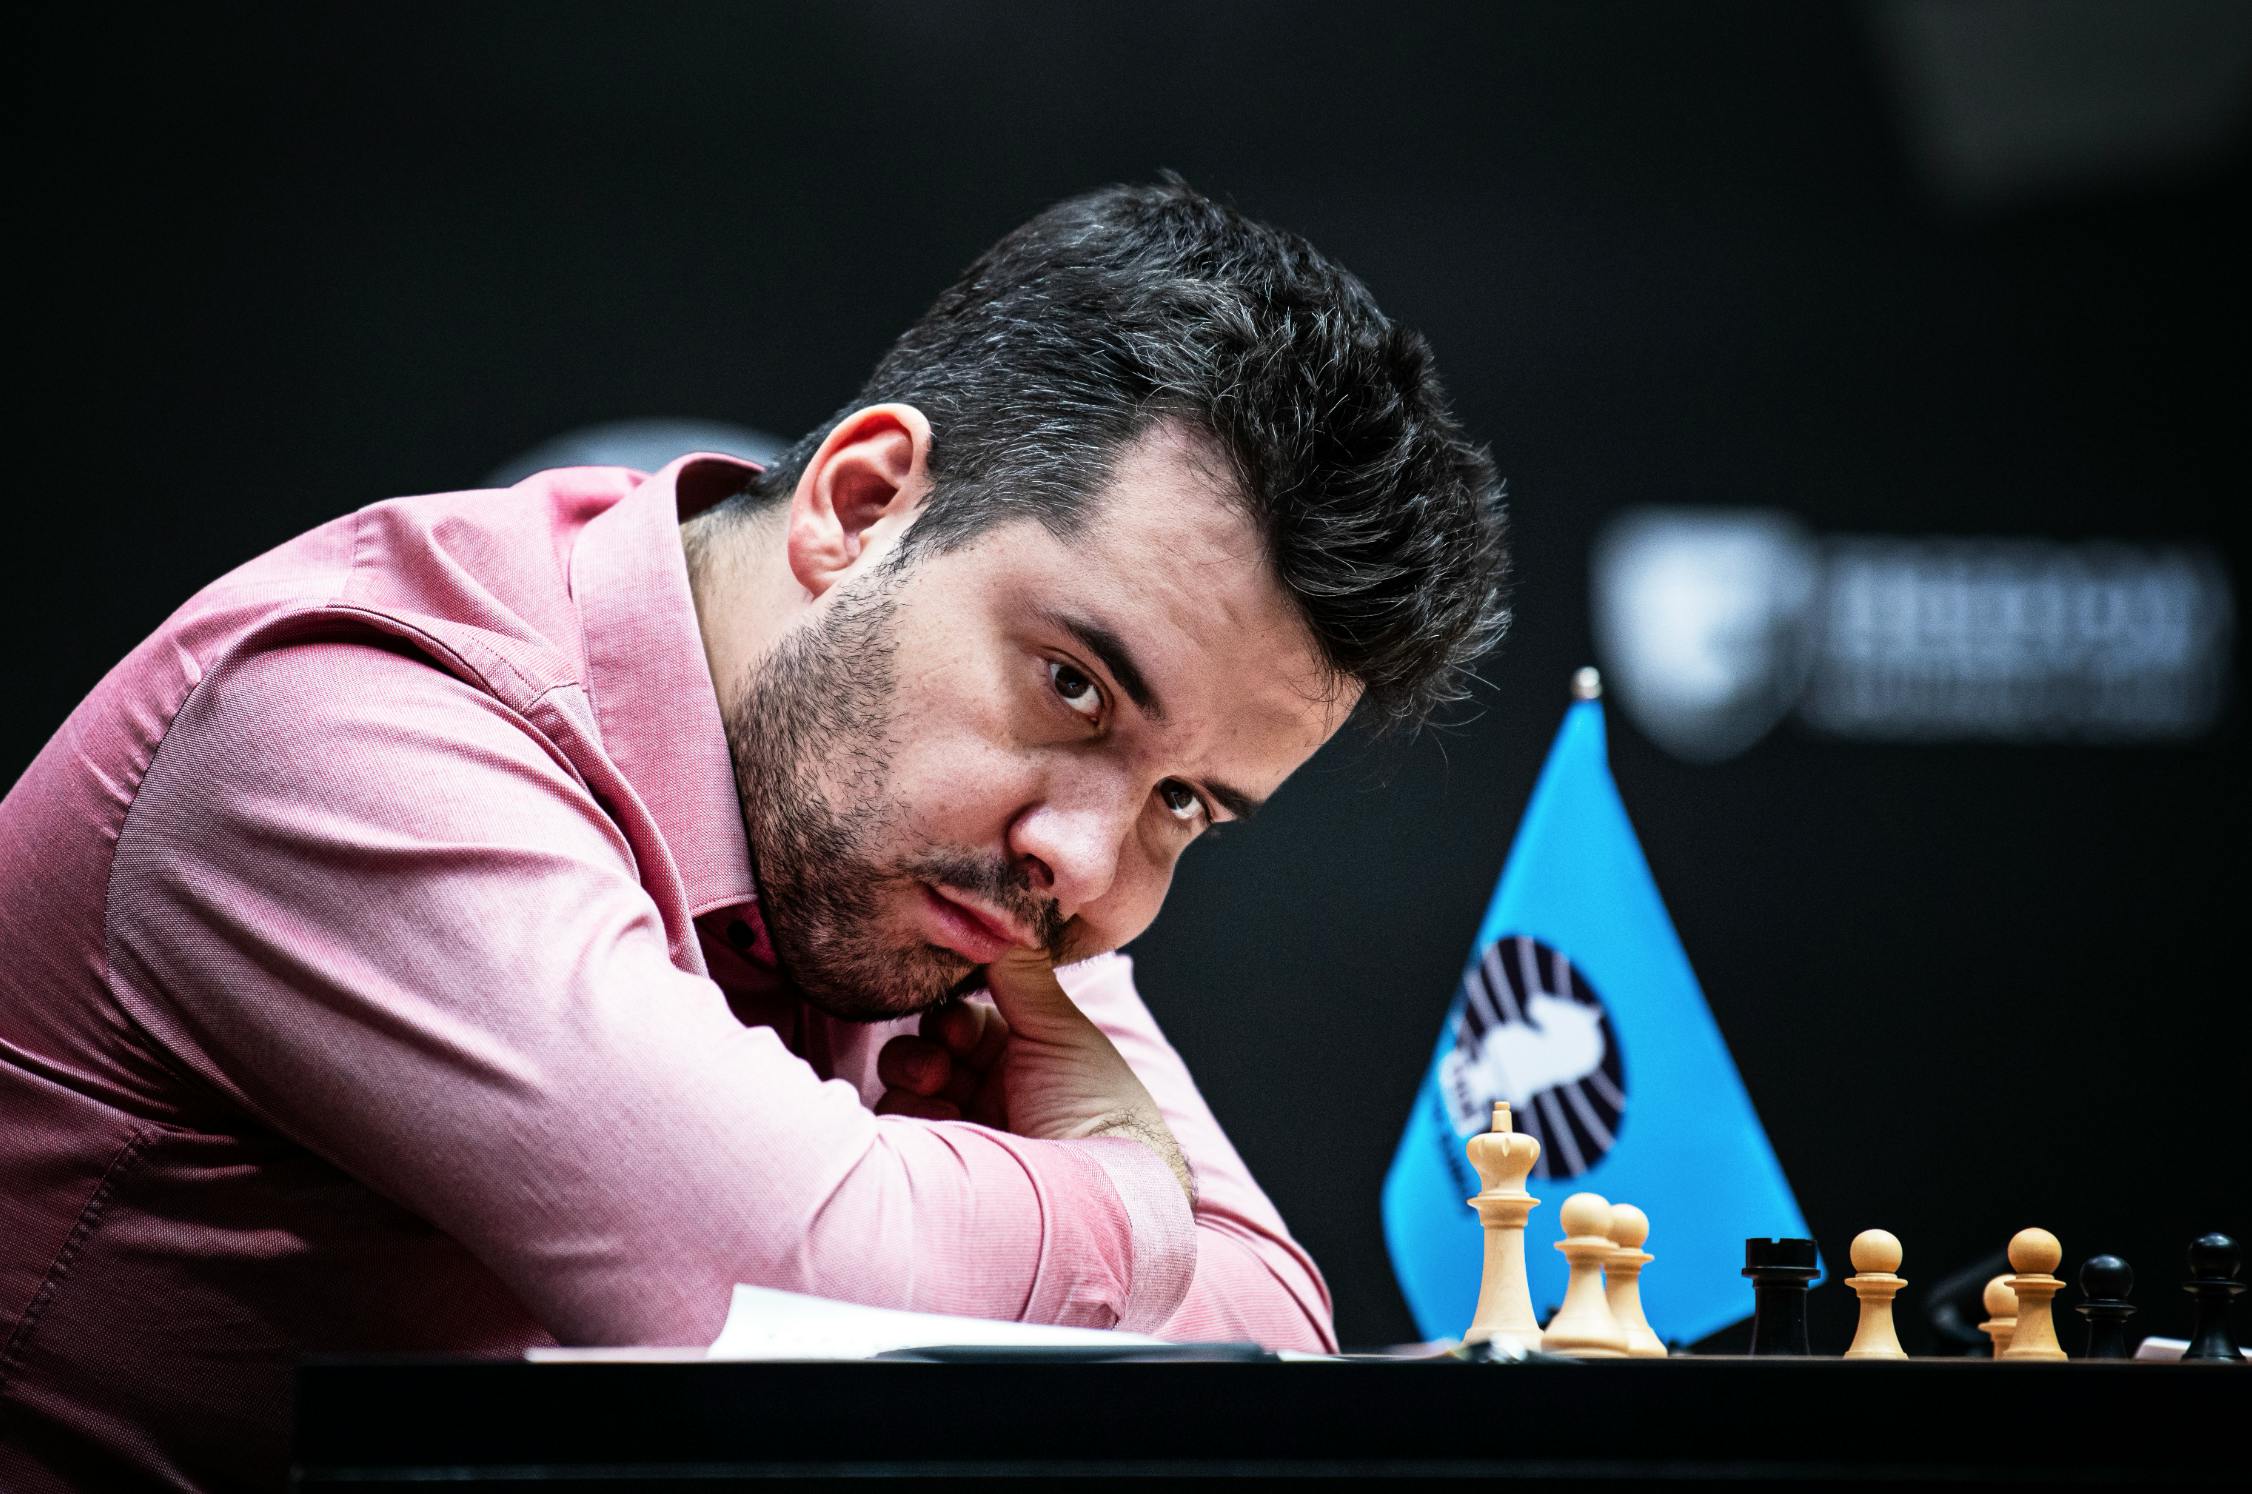 World Chess Championship: Games 10 and 11 - Business as Usual